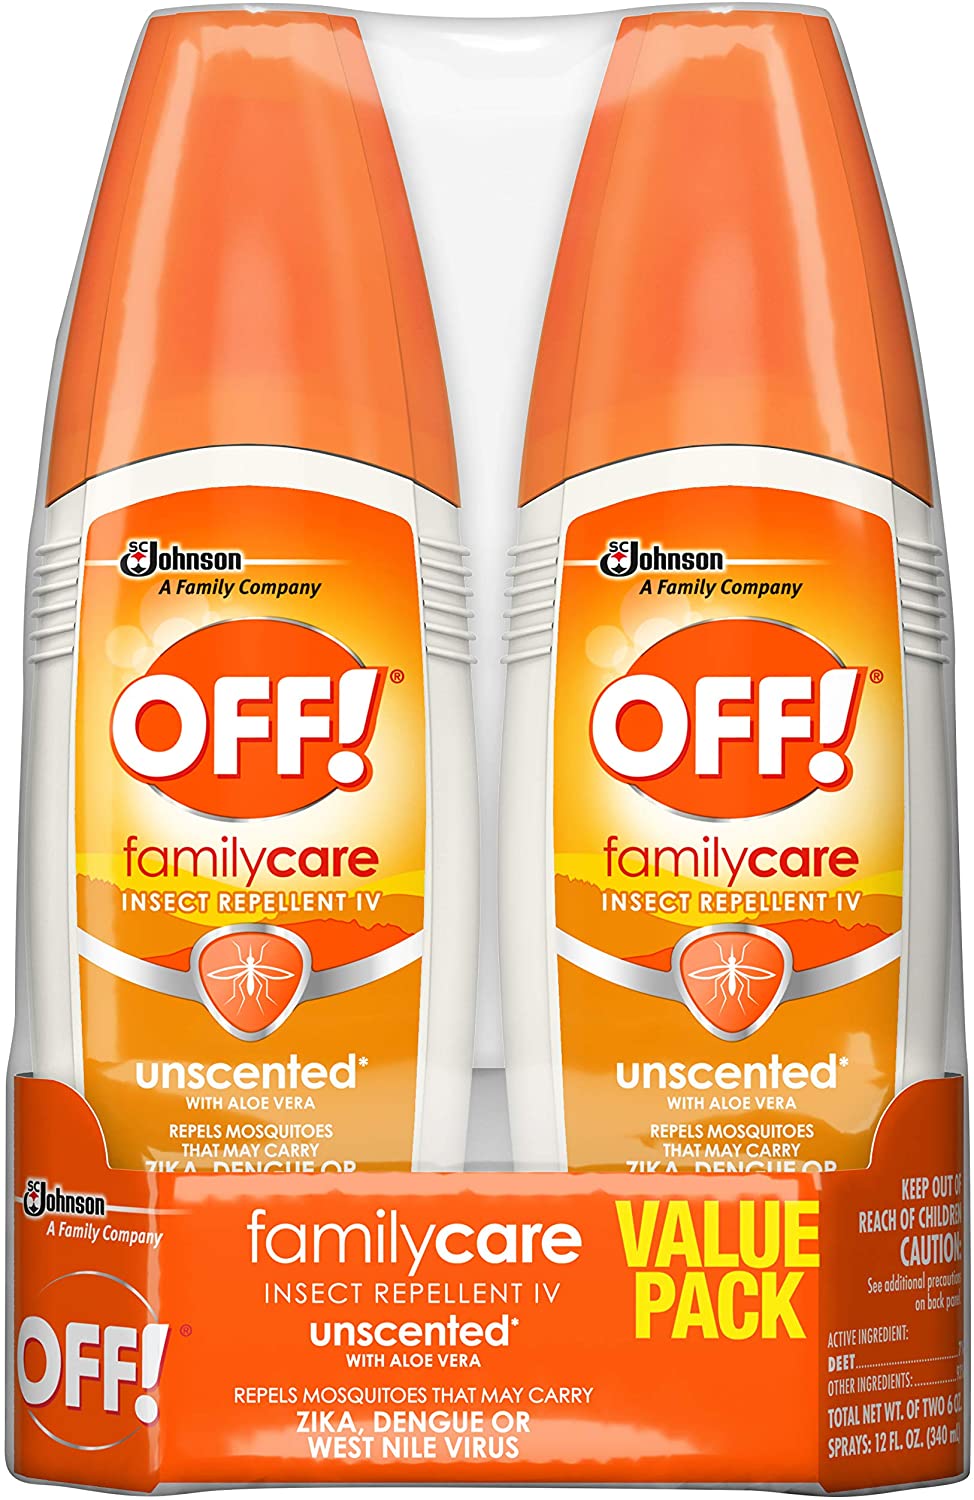 OFF! FamilyCare Unscented Insect Repellent IV